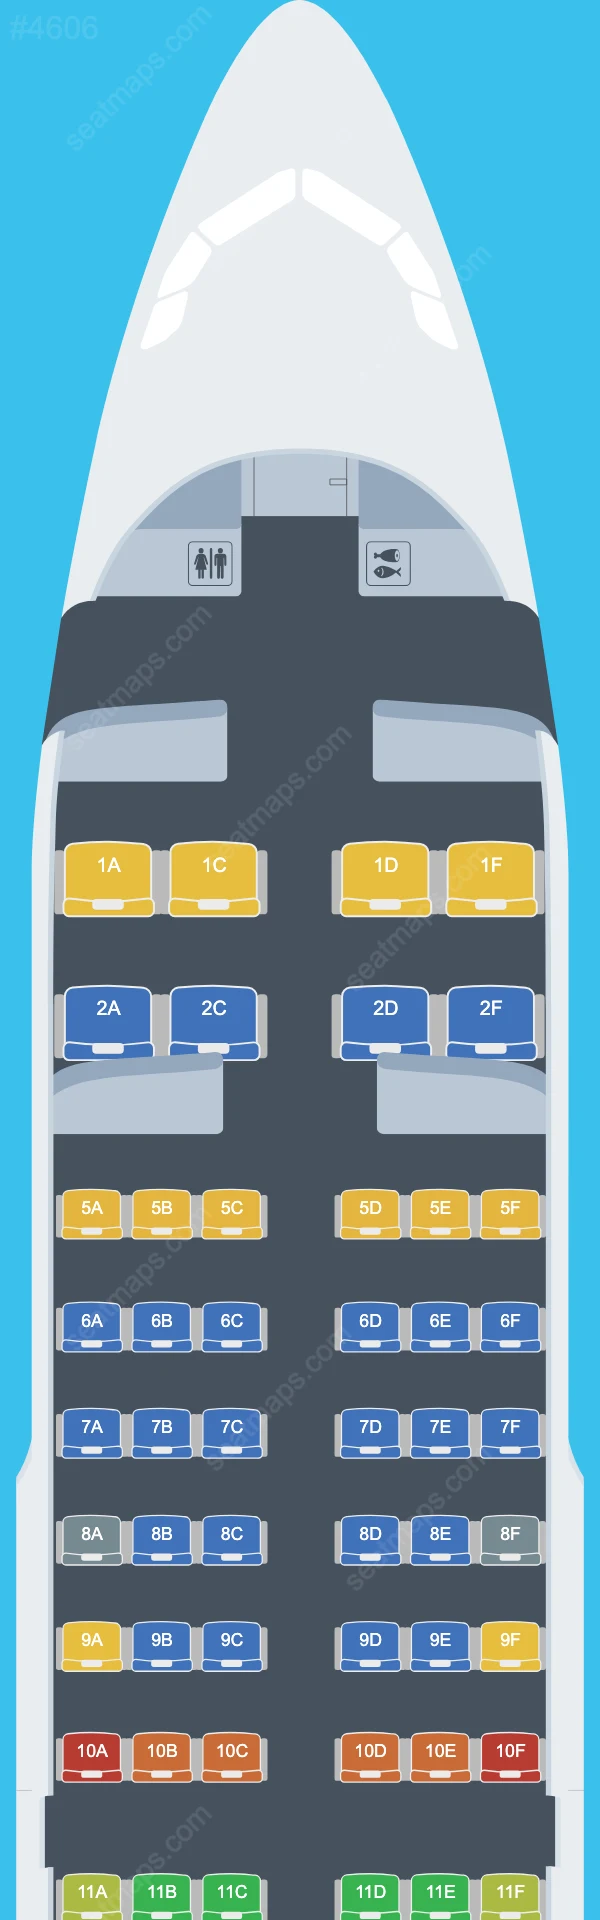 Chongqing Airlines Airbus A319 Seat Maps A319-100